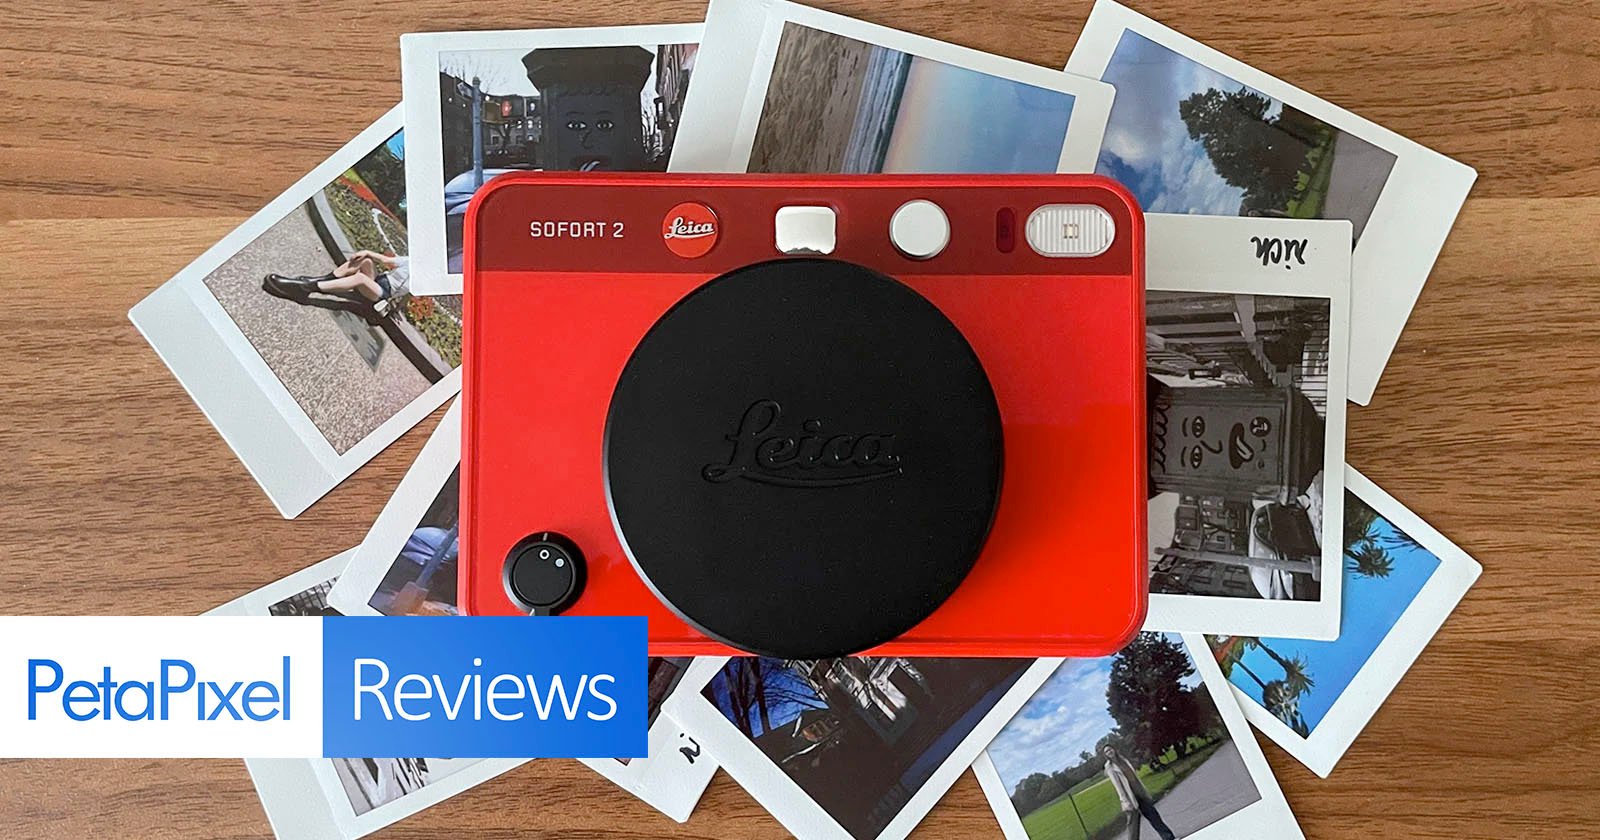 Leica Sofort 2 Review: Elevating the Instant Camera